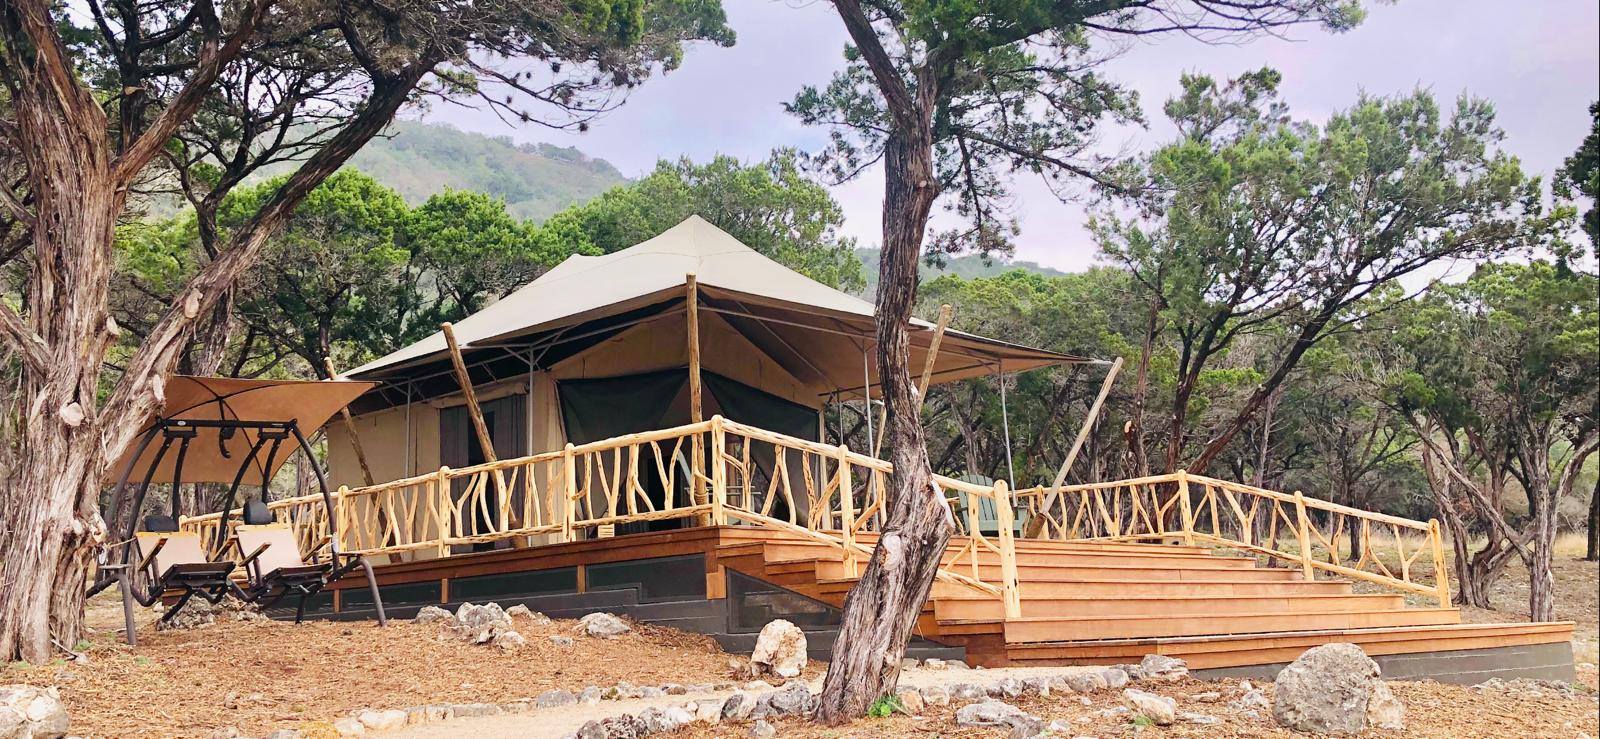 Glamping tent on wooden deck in mountains with a covered swing